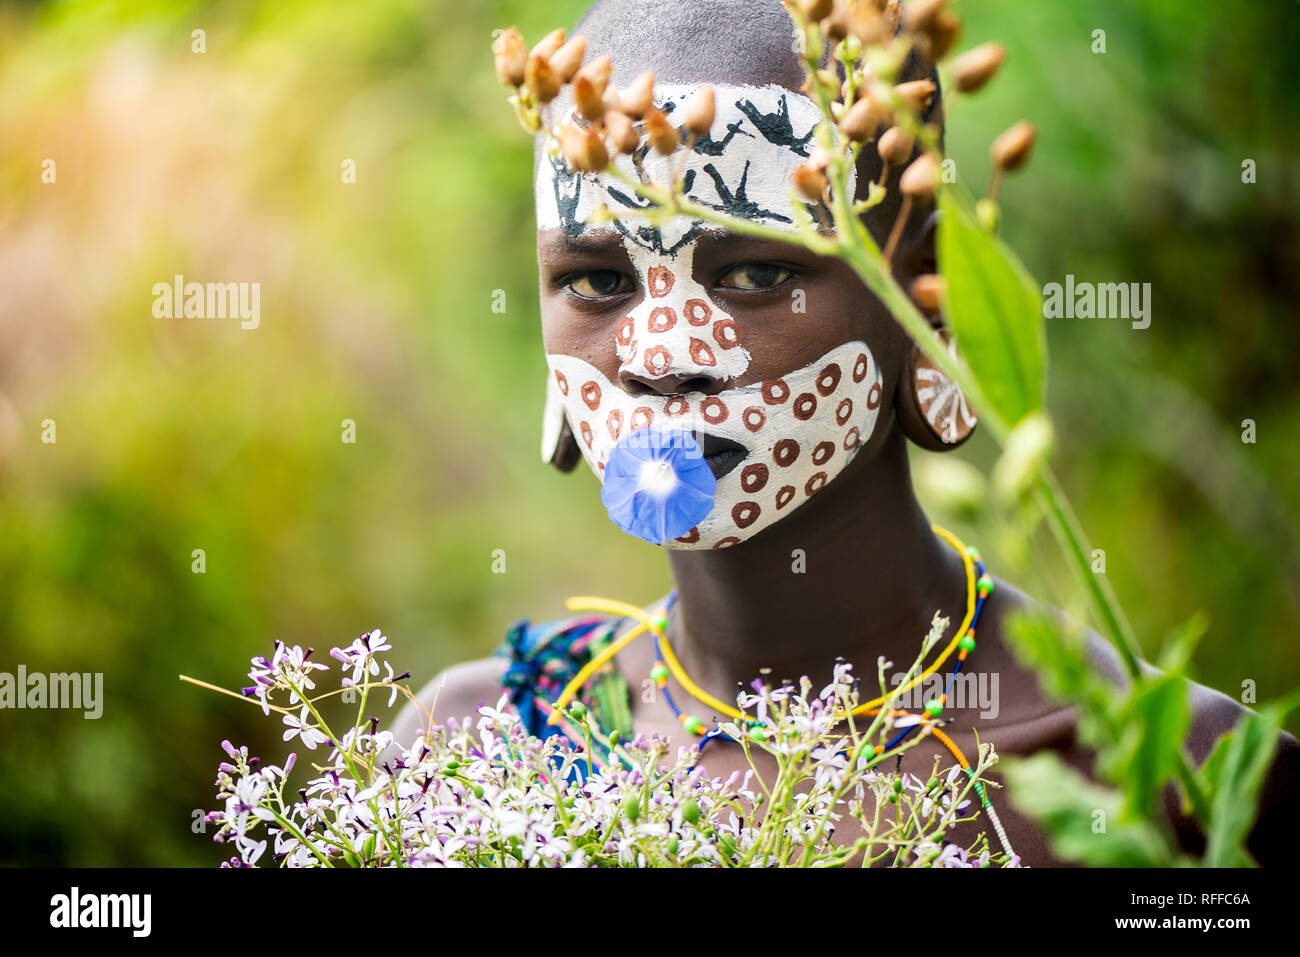 KIBISH, ETHIOPIA - AUGUST 22, 2018: unidentified woman from Surmi tribe, with  painted face and natural decorations of leave and flowers in a wreath.  Stock Photo